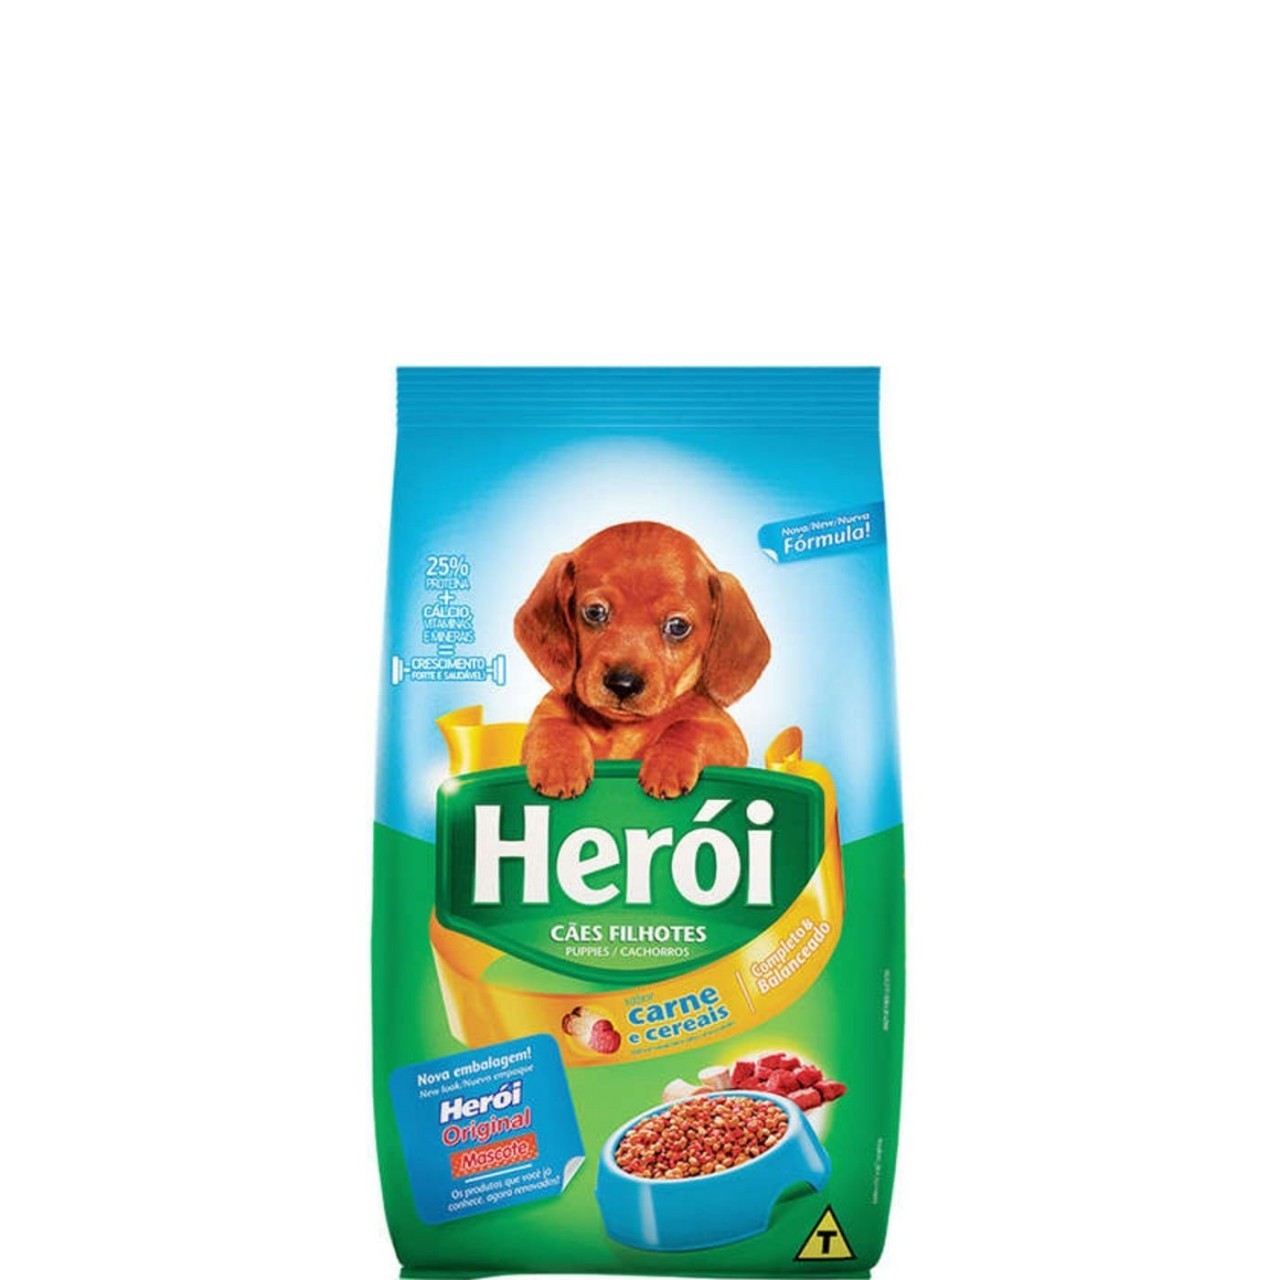 HEROI PUPPY BEEF AND CEREAL 1kg